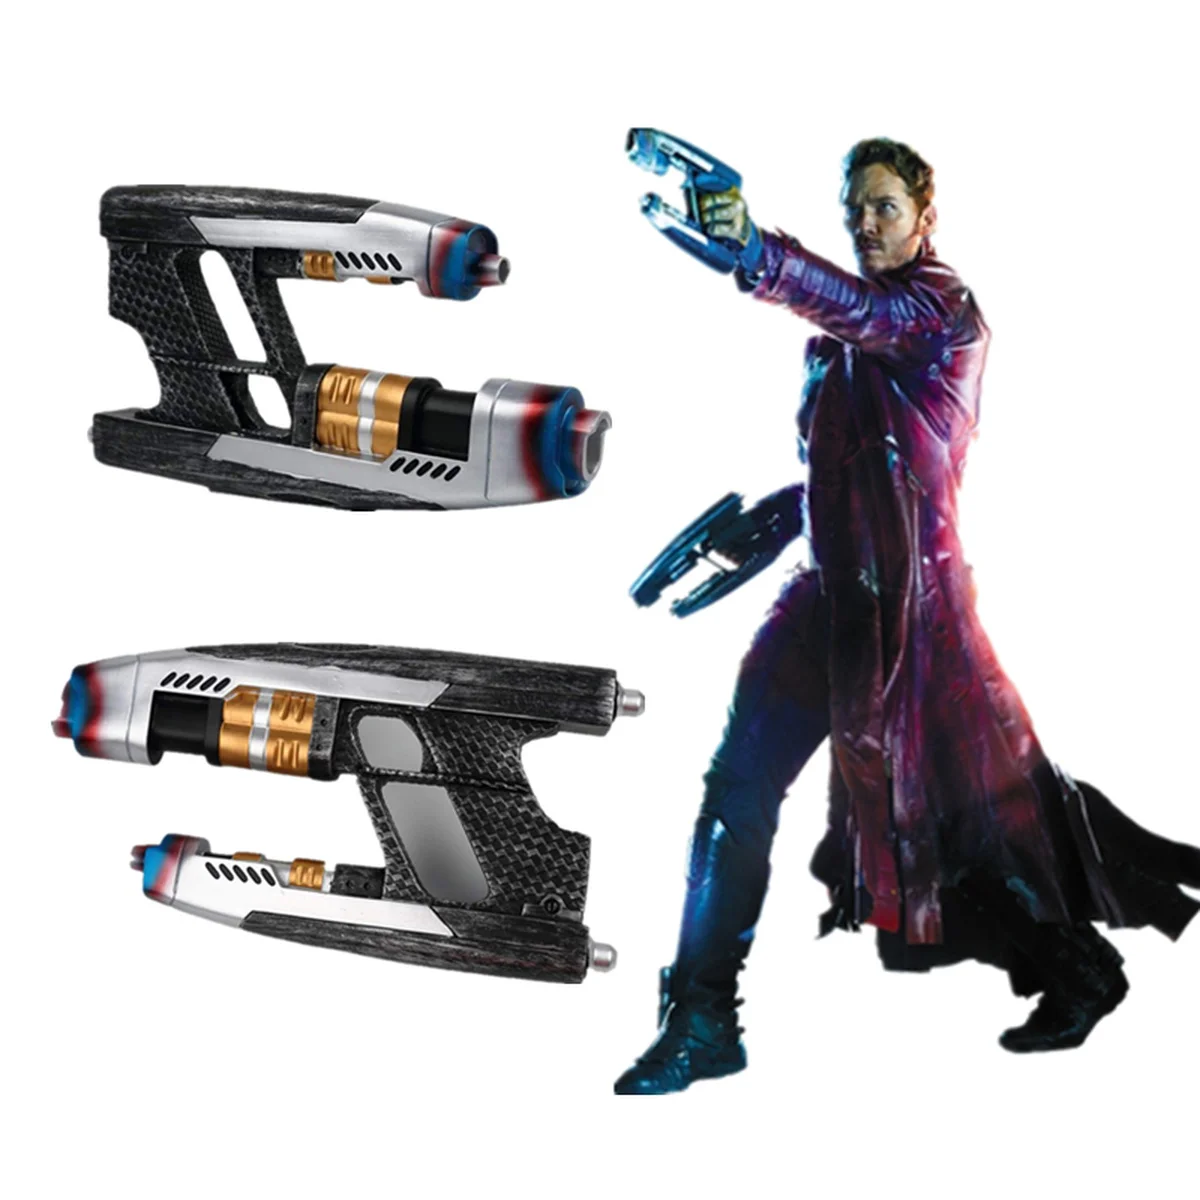 

Star Wars Lord Gun Blaster Resin 1:1 Replica Cosplay for Guardians of The Galaxy Peter Quill Gun Weapon Toys for Adults Gift